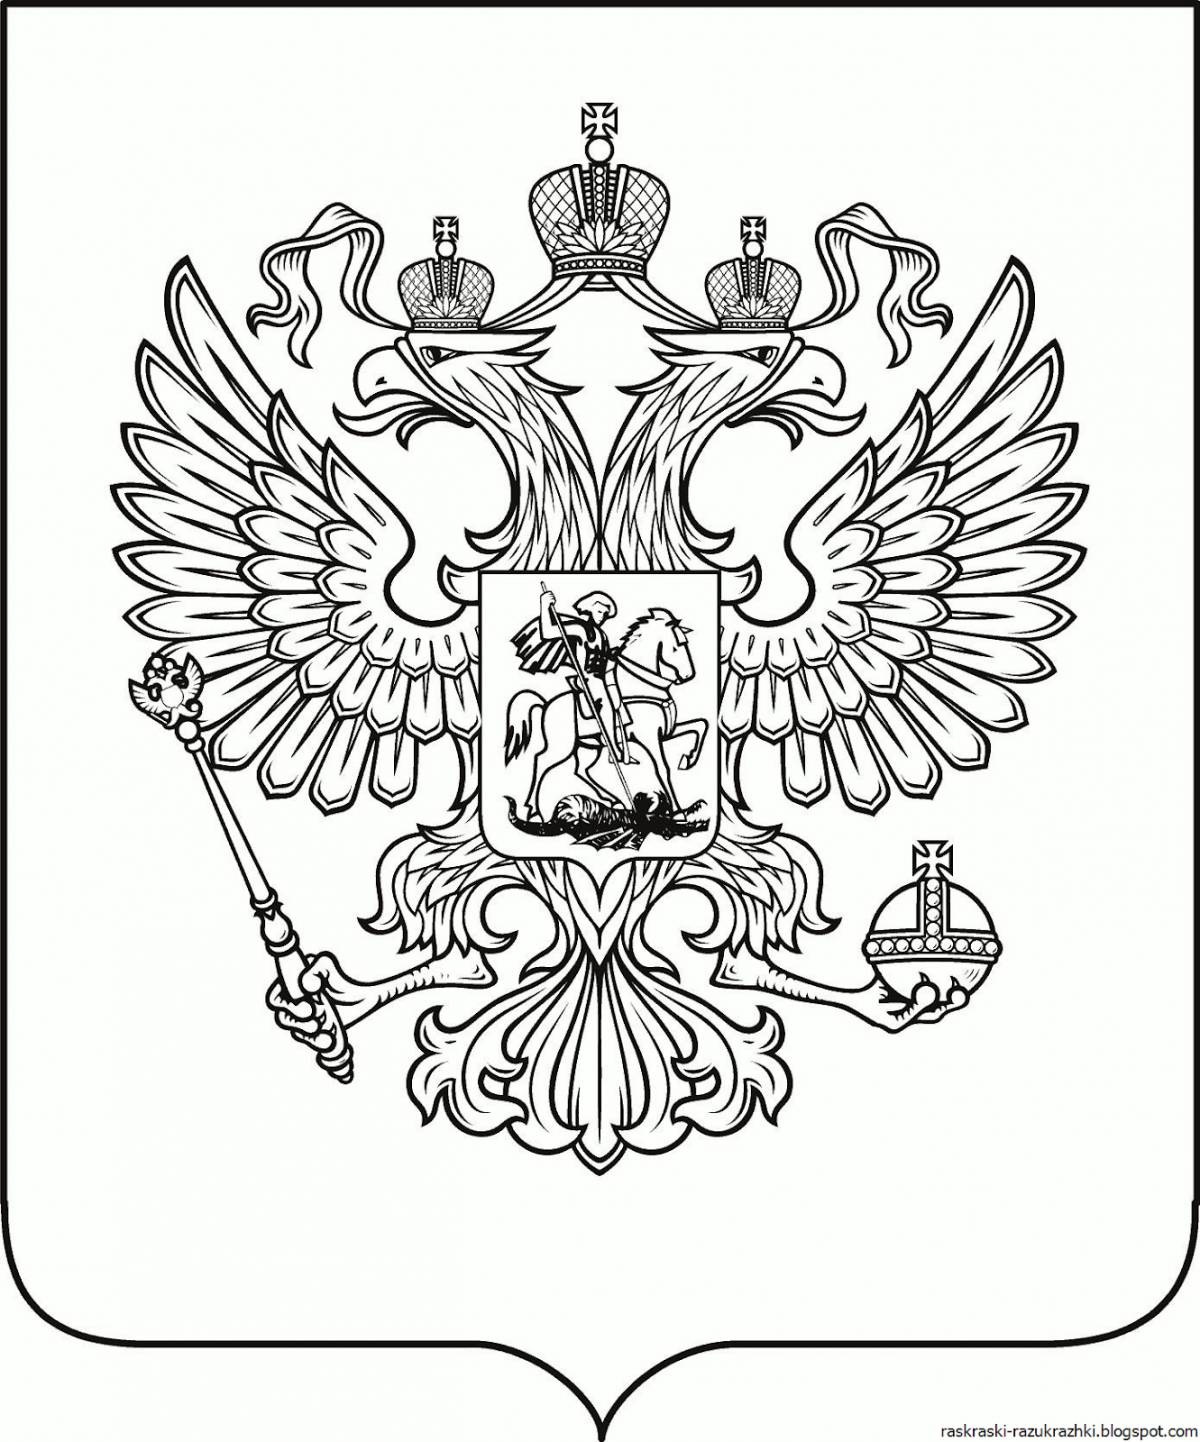 Coat of arms of Russia #7